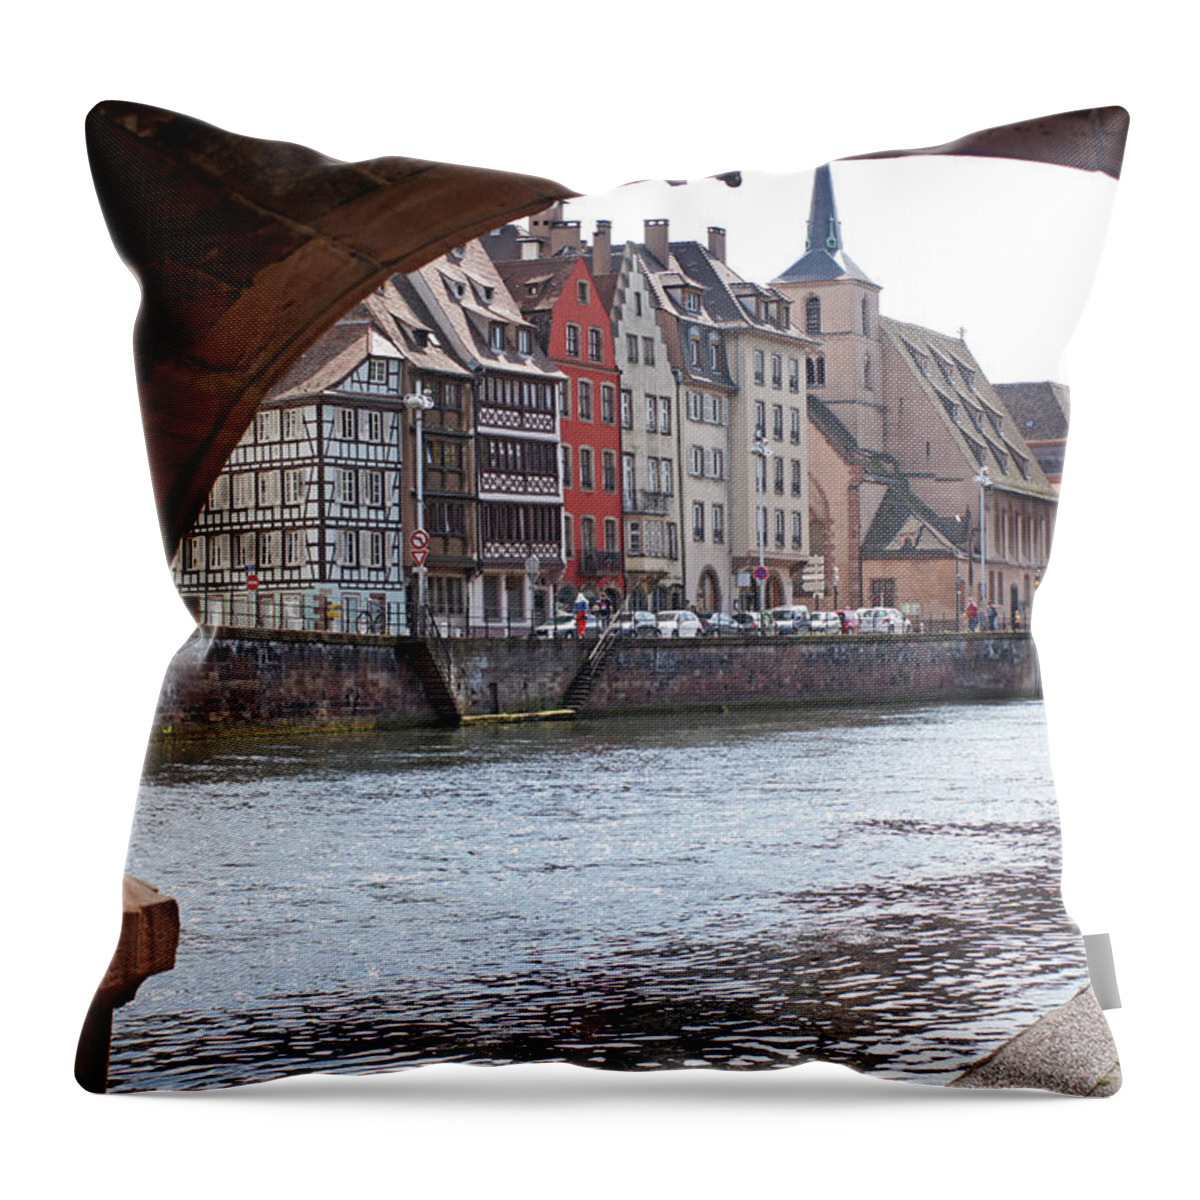  Throw Pillow featuring the photograph Rhine River 29 Strasbourg by Steve Breslow